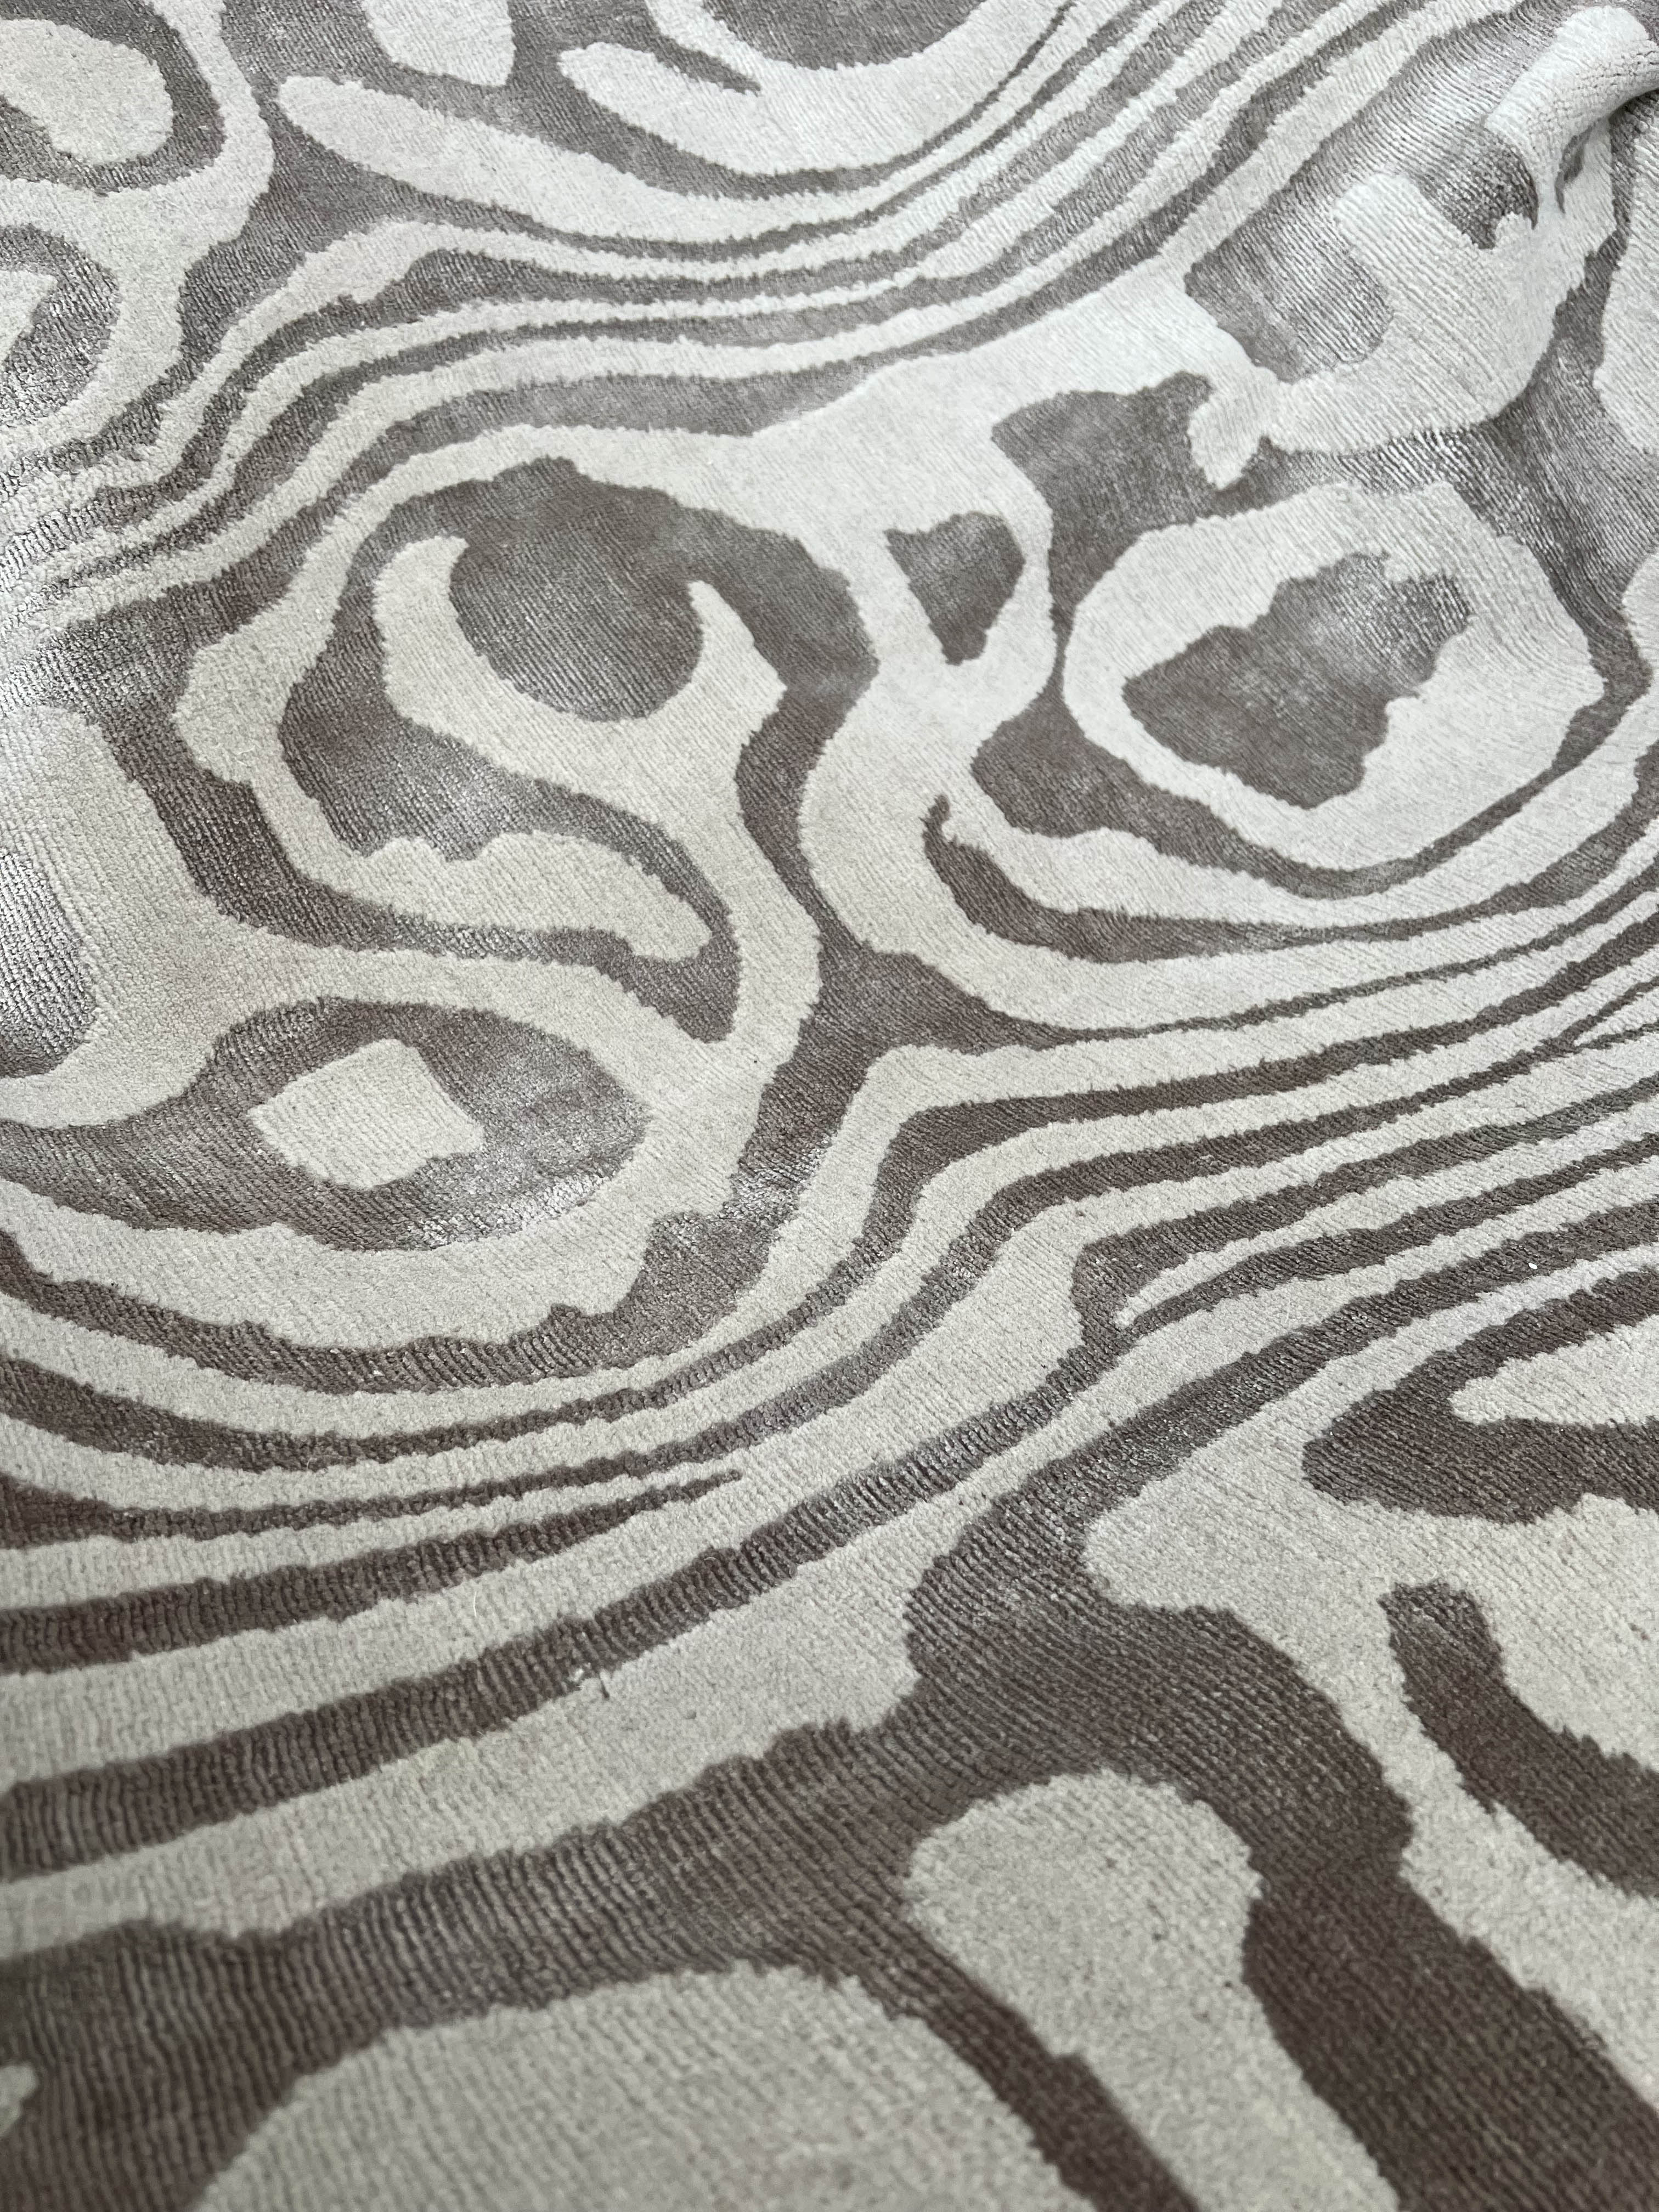 RIVIEIRE RUGS CONTEMPORARY BESPOKE WOOL AND SILK CARPET, 664cm x 399cm. - Image 2 of 7